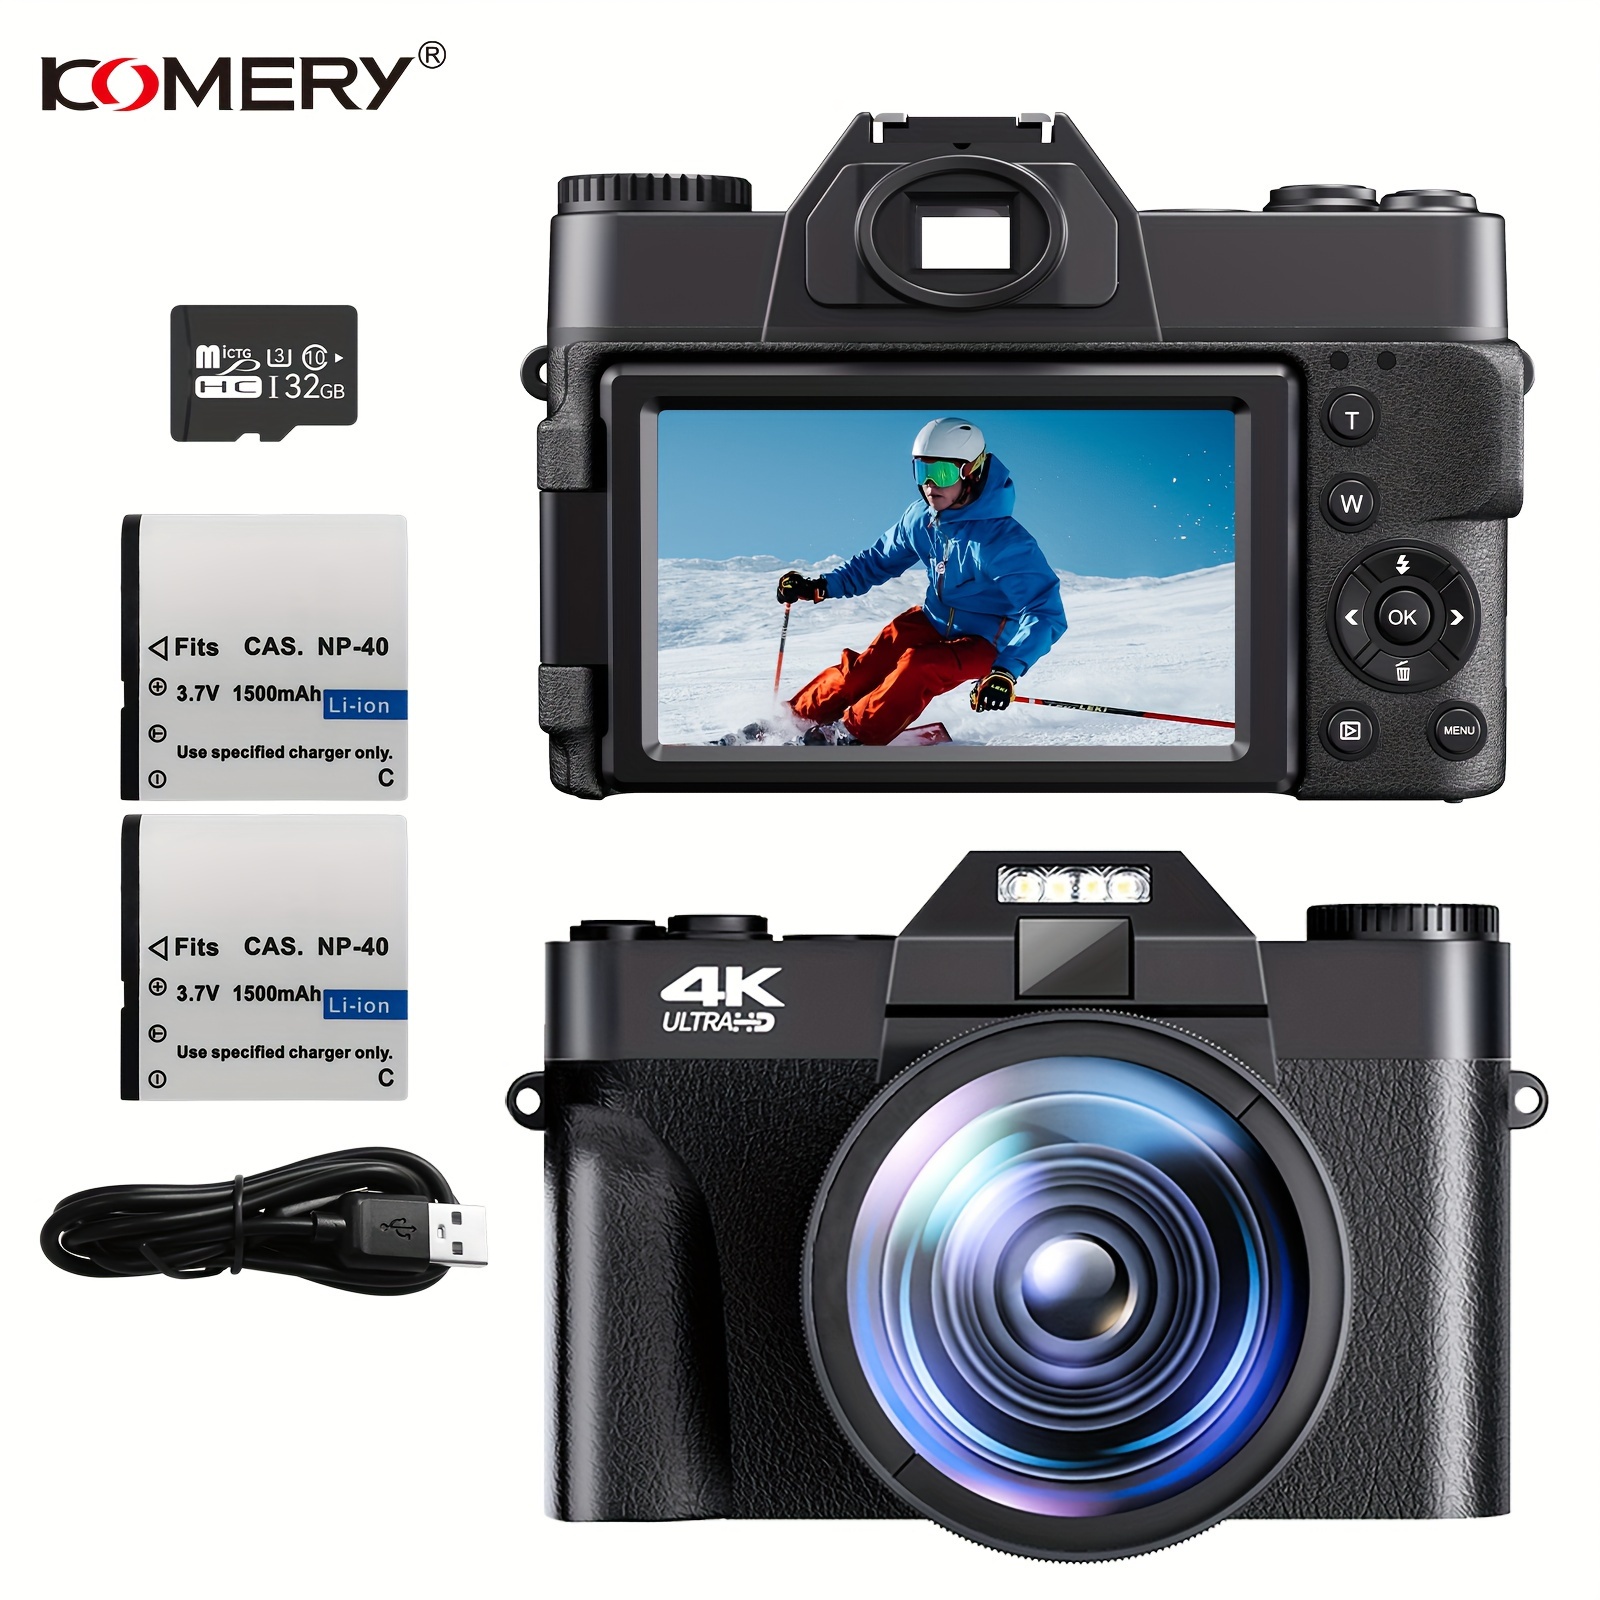 

Komery Digital Camera, 4k Vlogging Camera With 16x Digital Zoom, Built-in 7 Color Filters, 3.0 Inch Screen, Flip Screen, 32gb Tf Card And Rechargeable Battery (black)